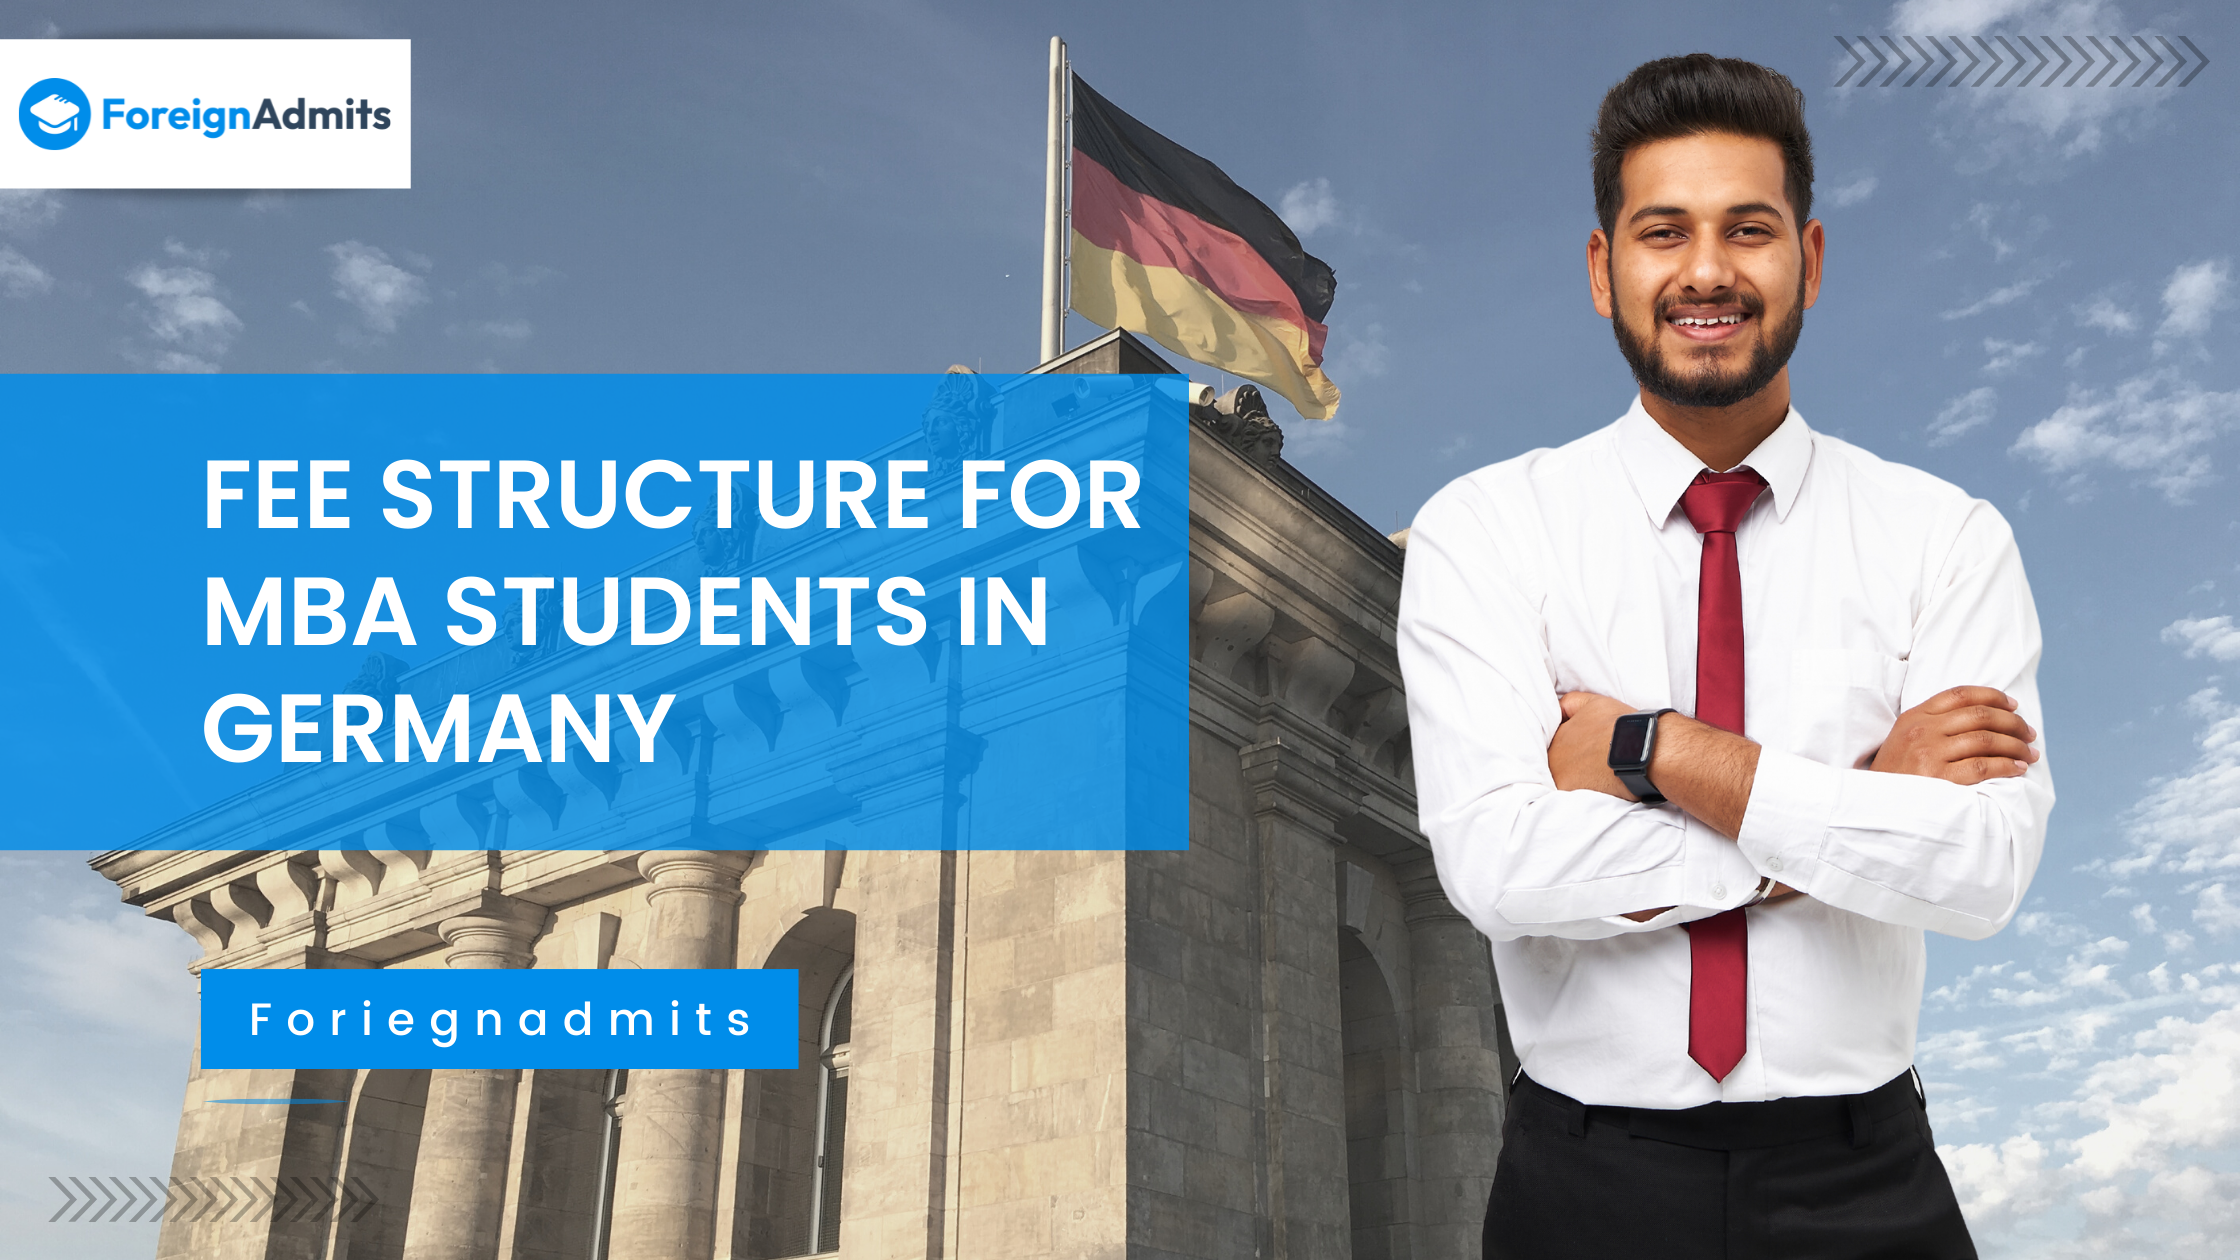 Fee Structure for MBA students in Germany